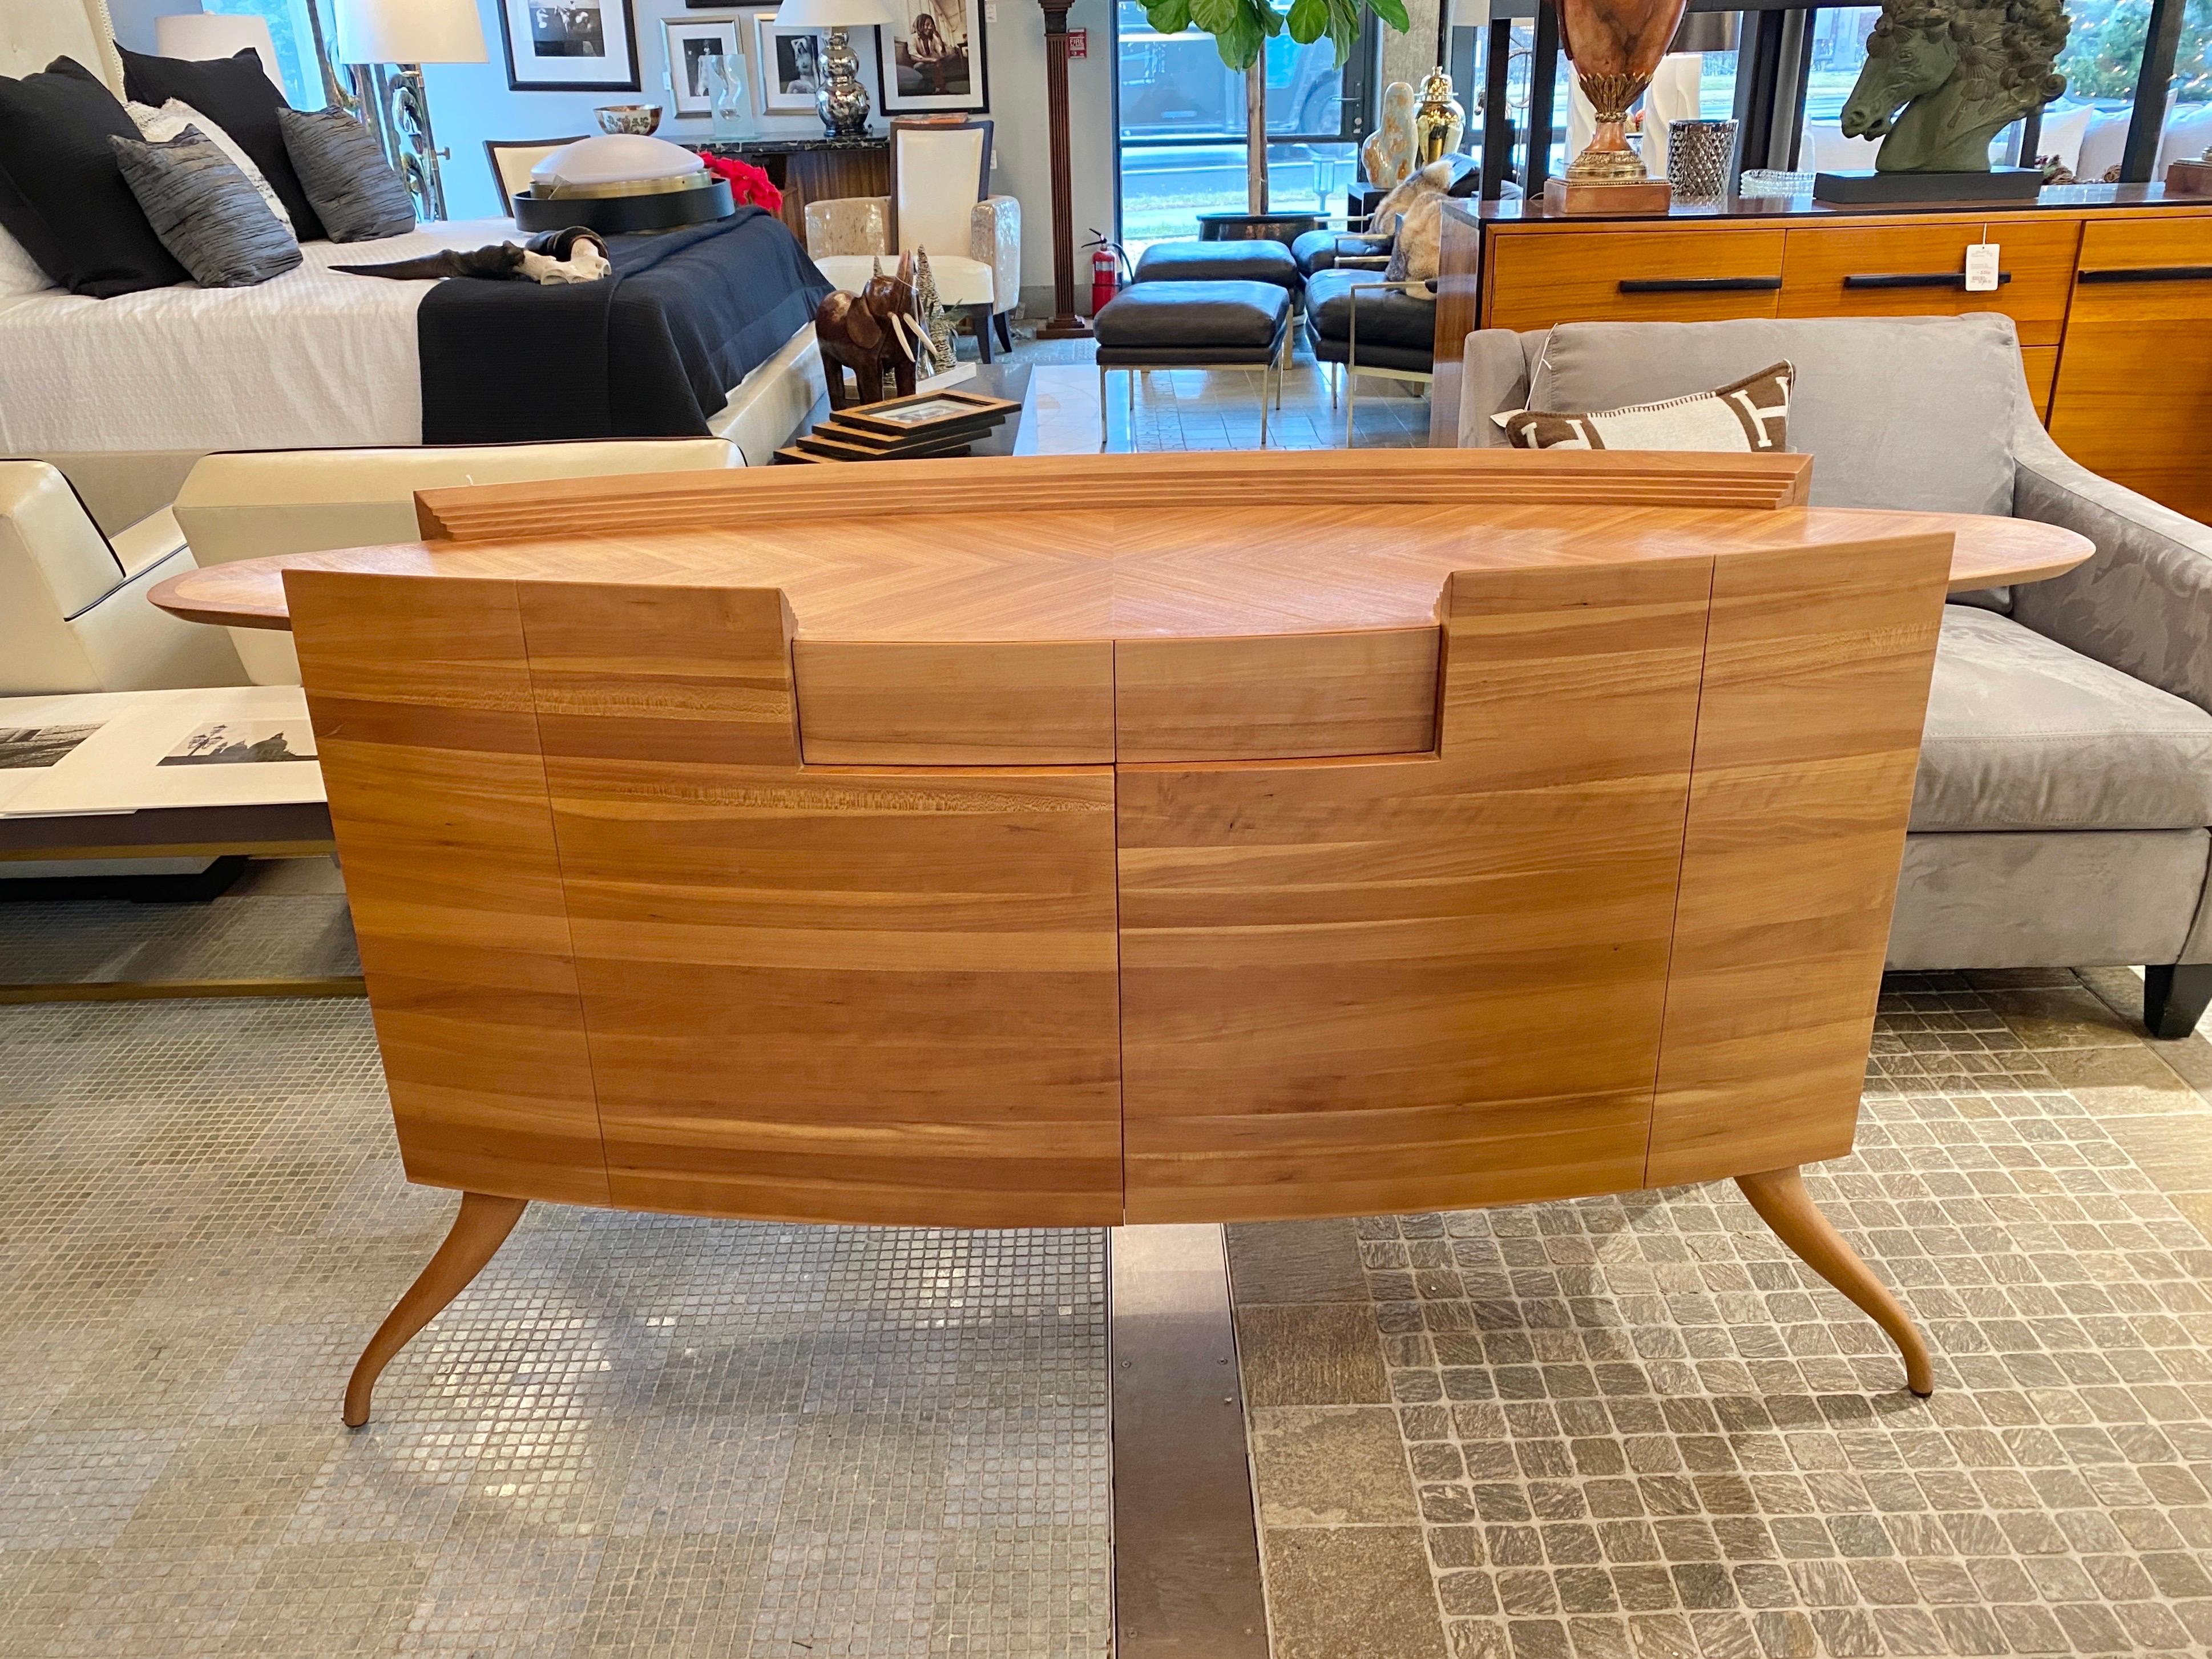 Ceccotti Collezioni mid century bleached oval console

Craftsmanship at it absolute finest! This is a gorgeous piece.

Measures: 68.5